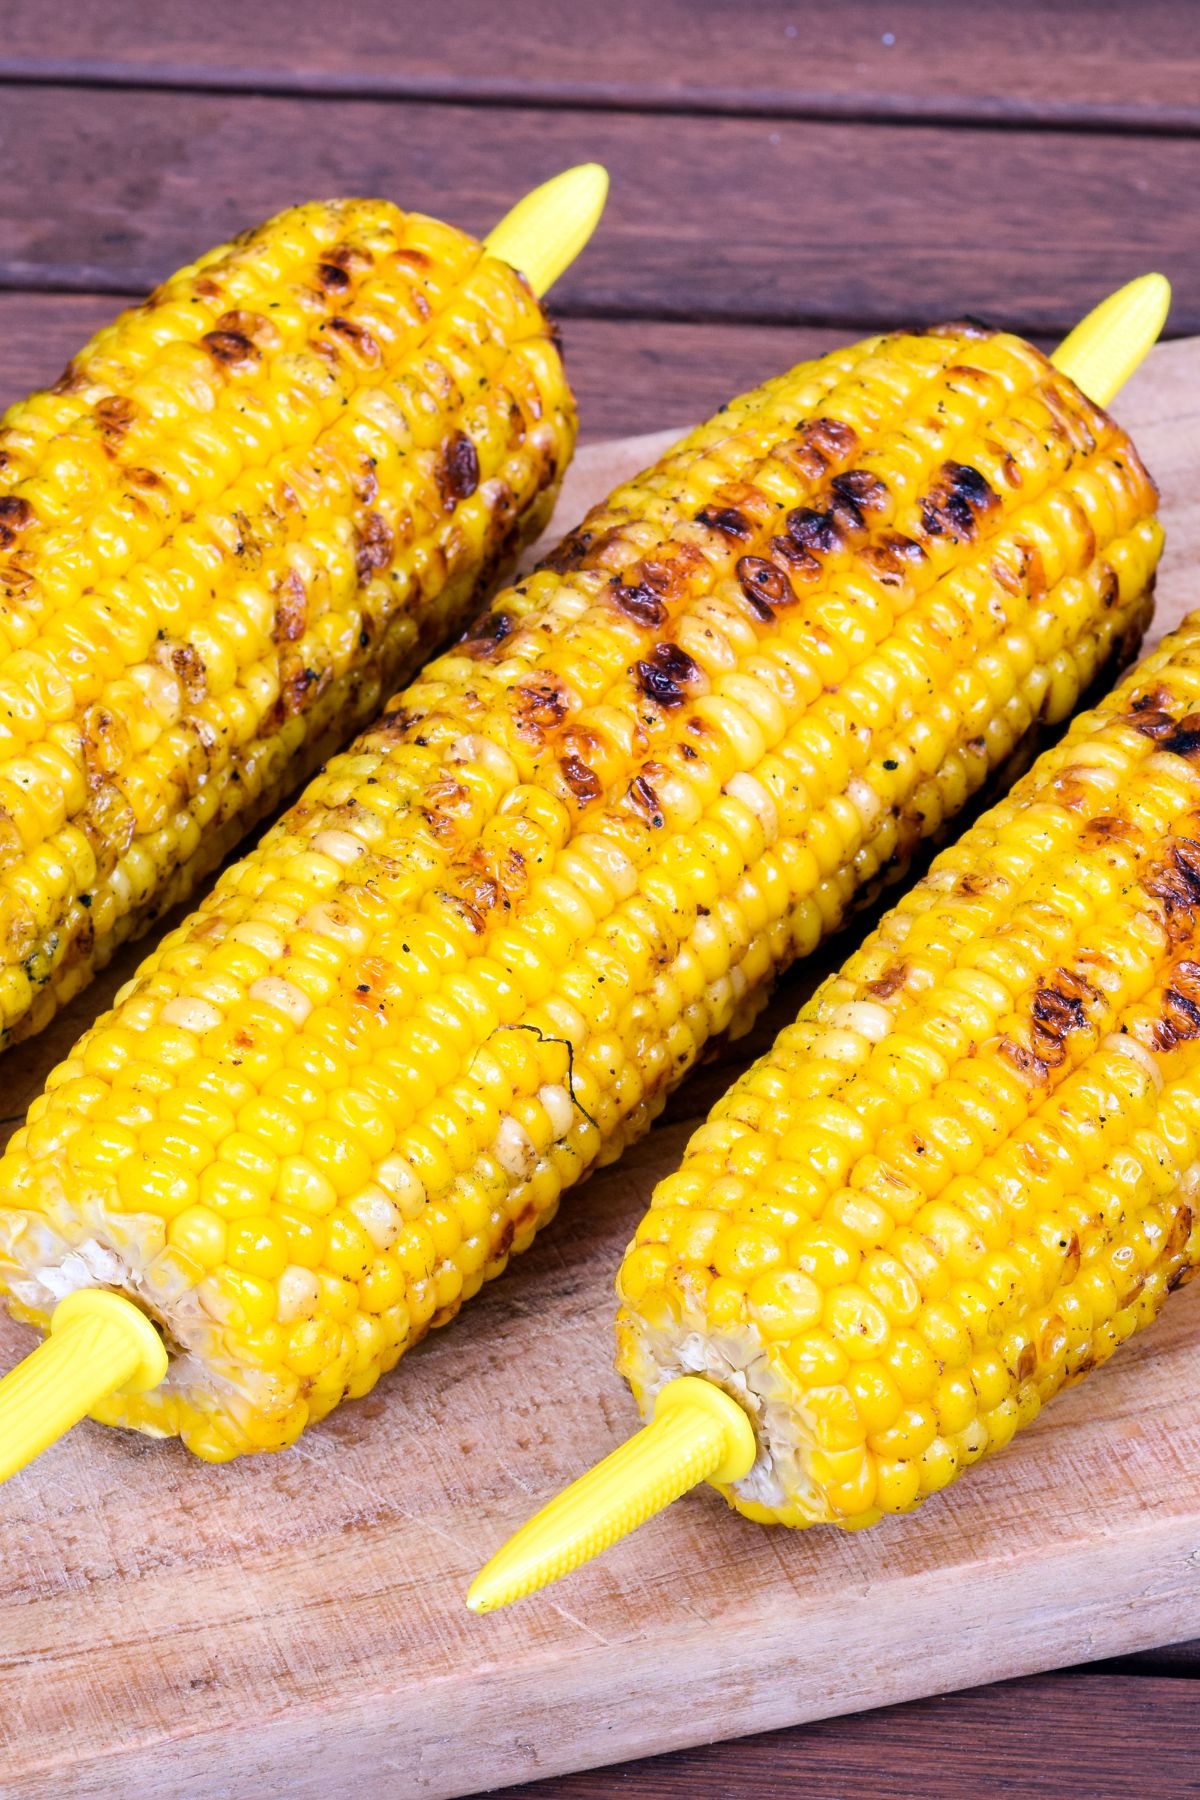 Grilled corn on the cob with corn forks on wooden board.